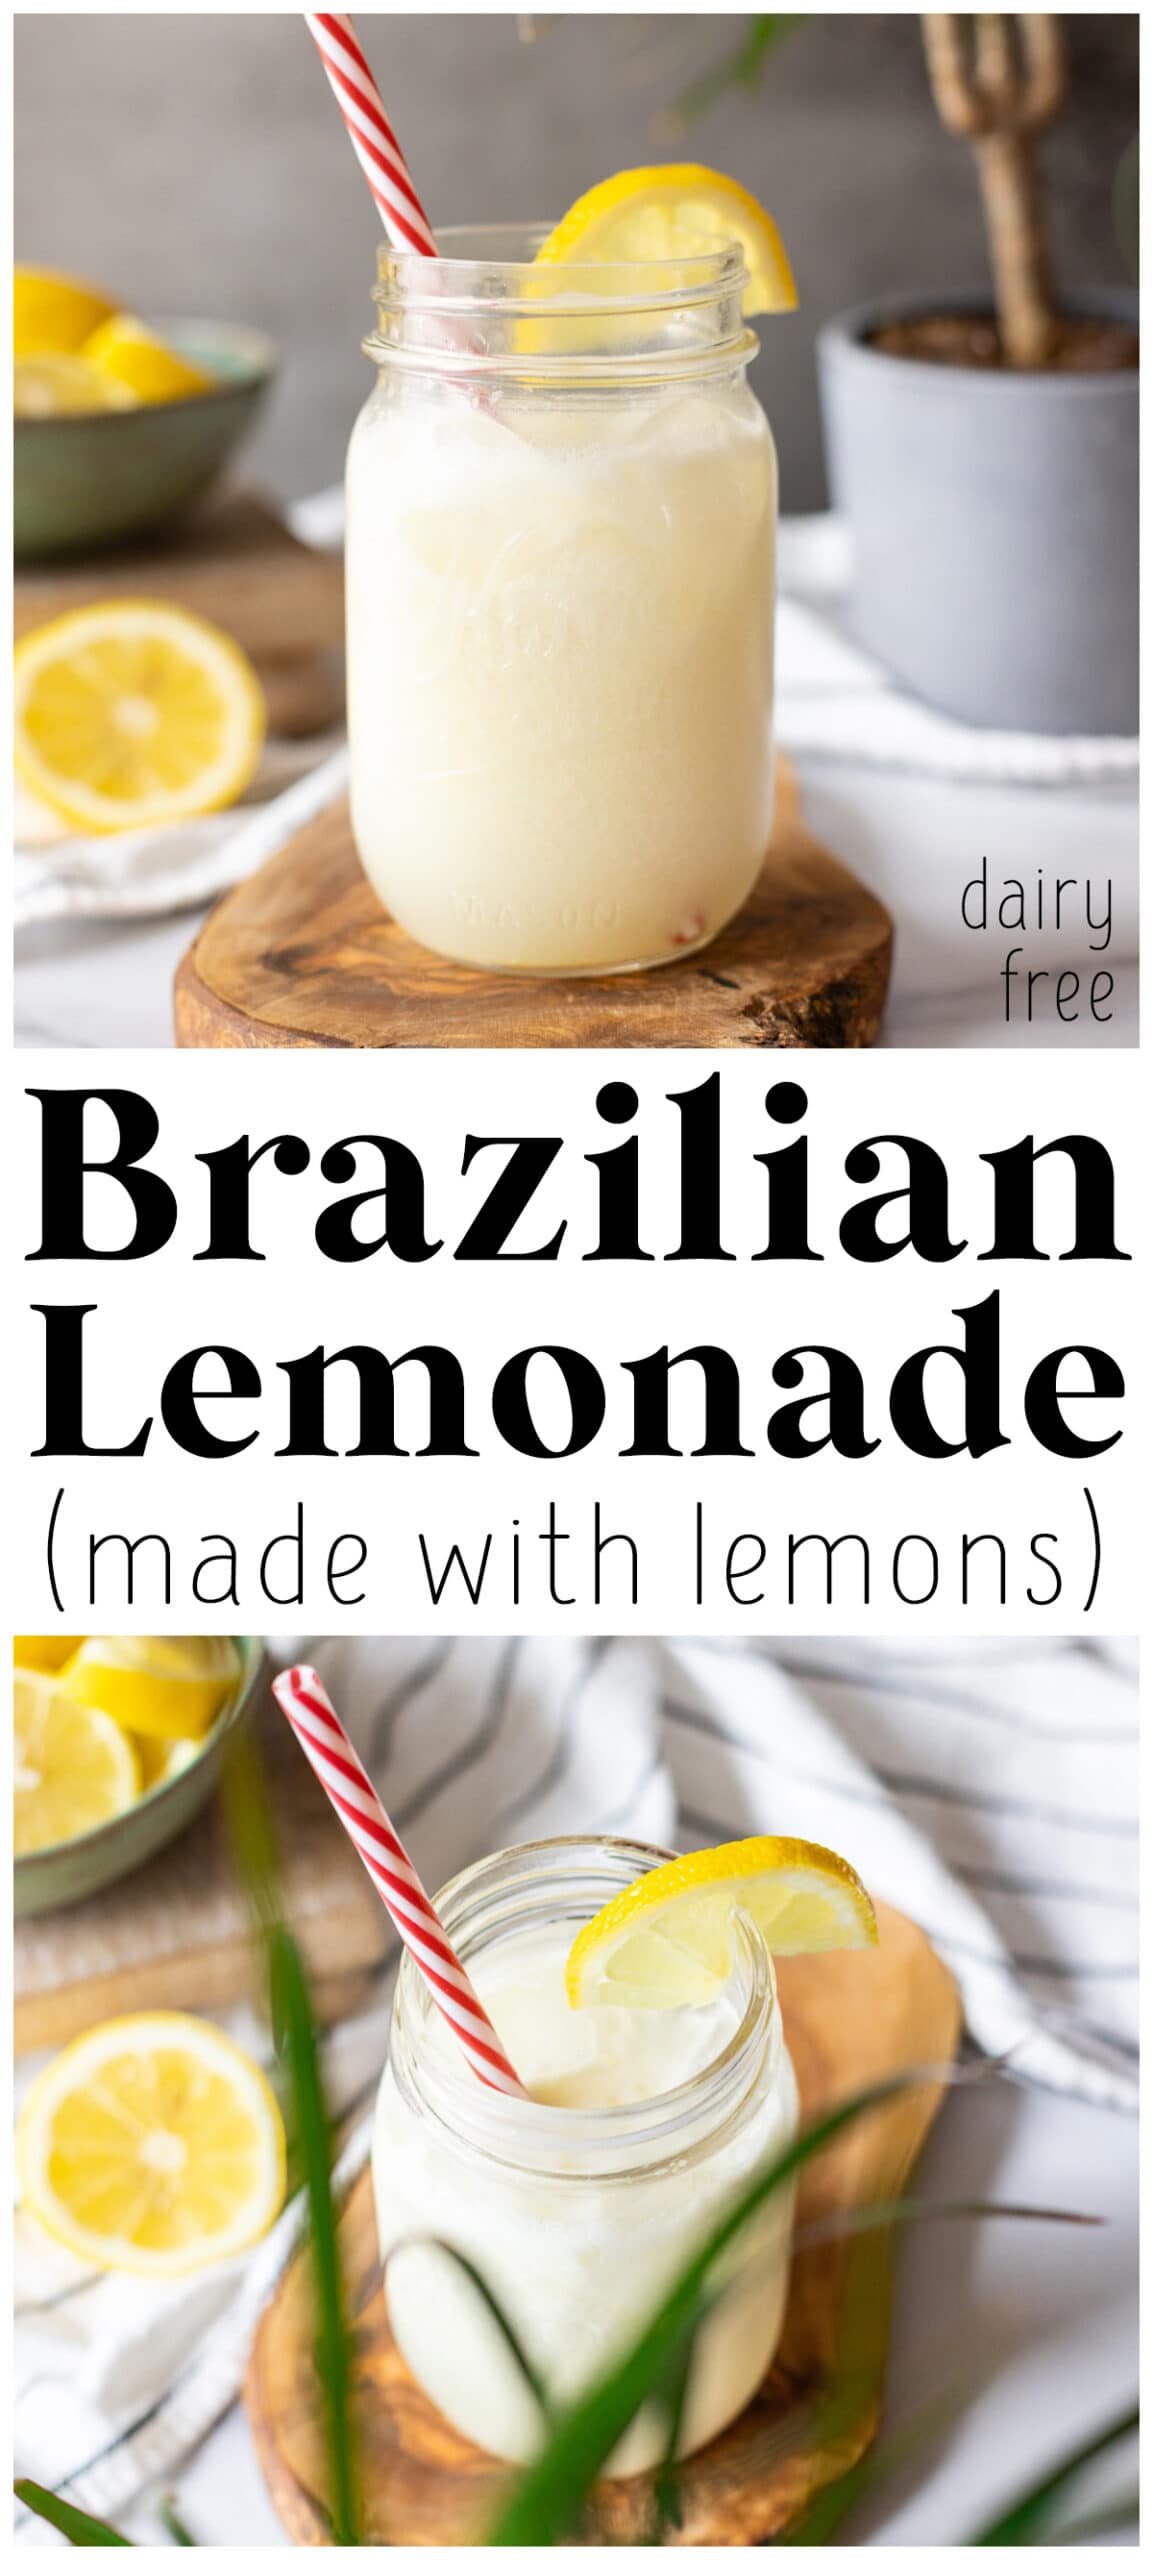 photo collage showing glass jar of brazilian lemonade with a red and white straw.